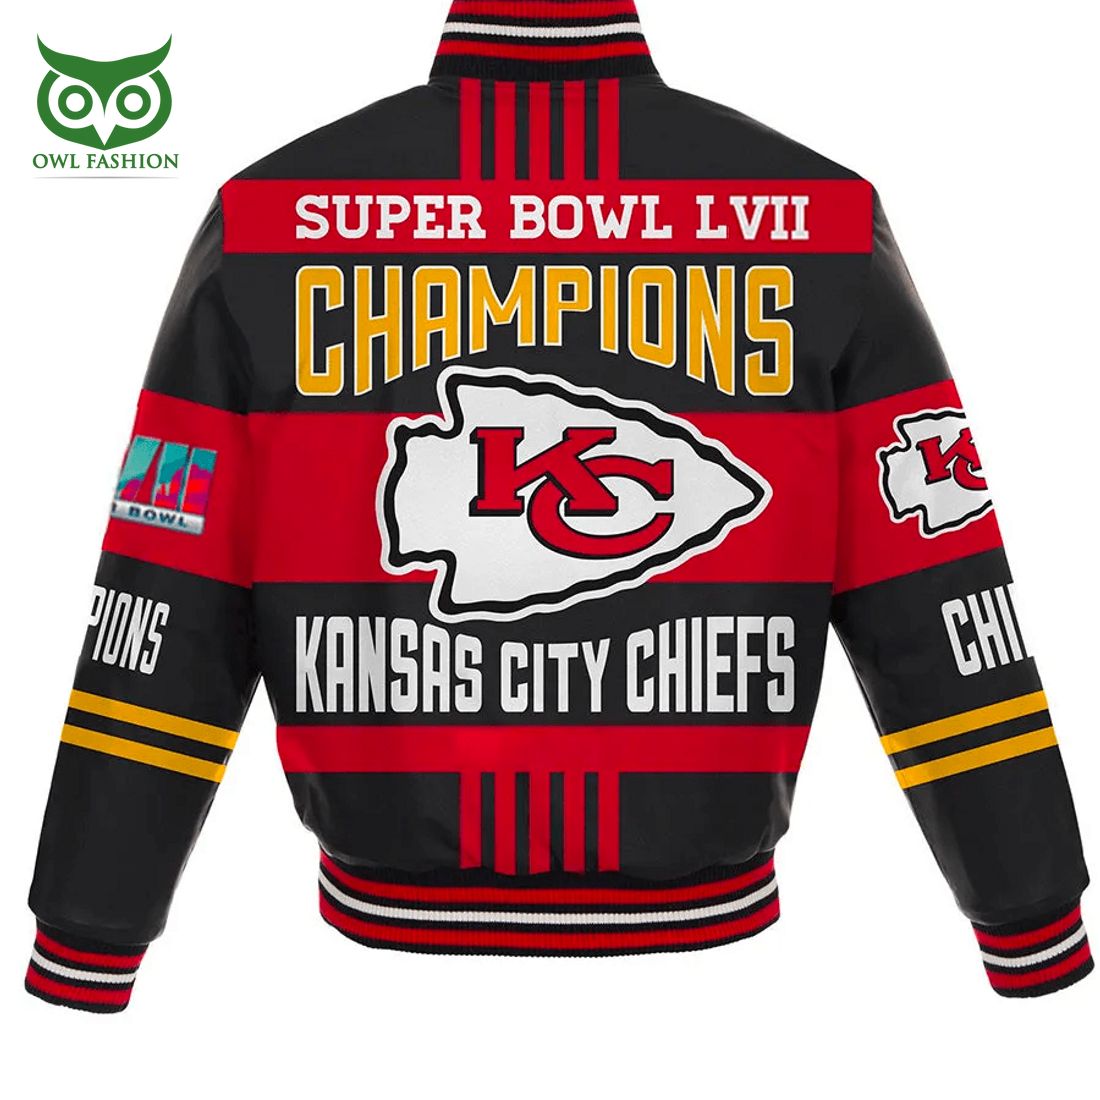 Chiefs win Super Bowl 2020: Celebrate with T-shirts, hoodies, hats! -  Arrowhead Pride